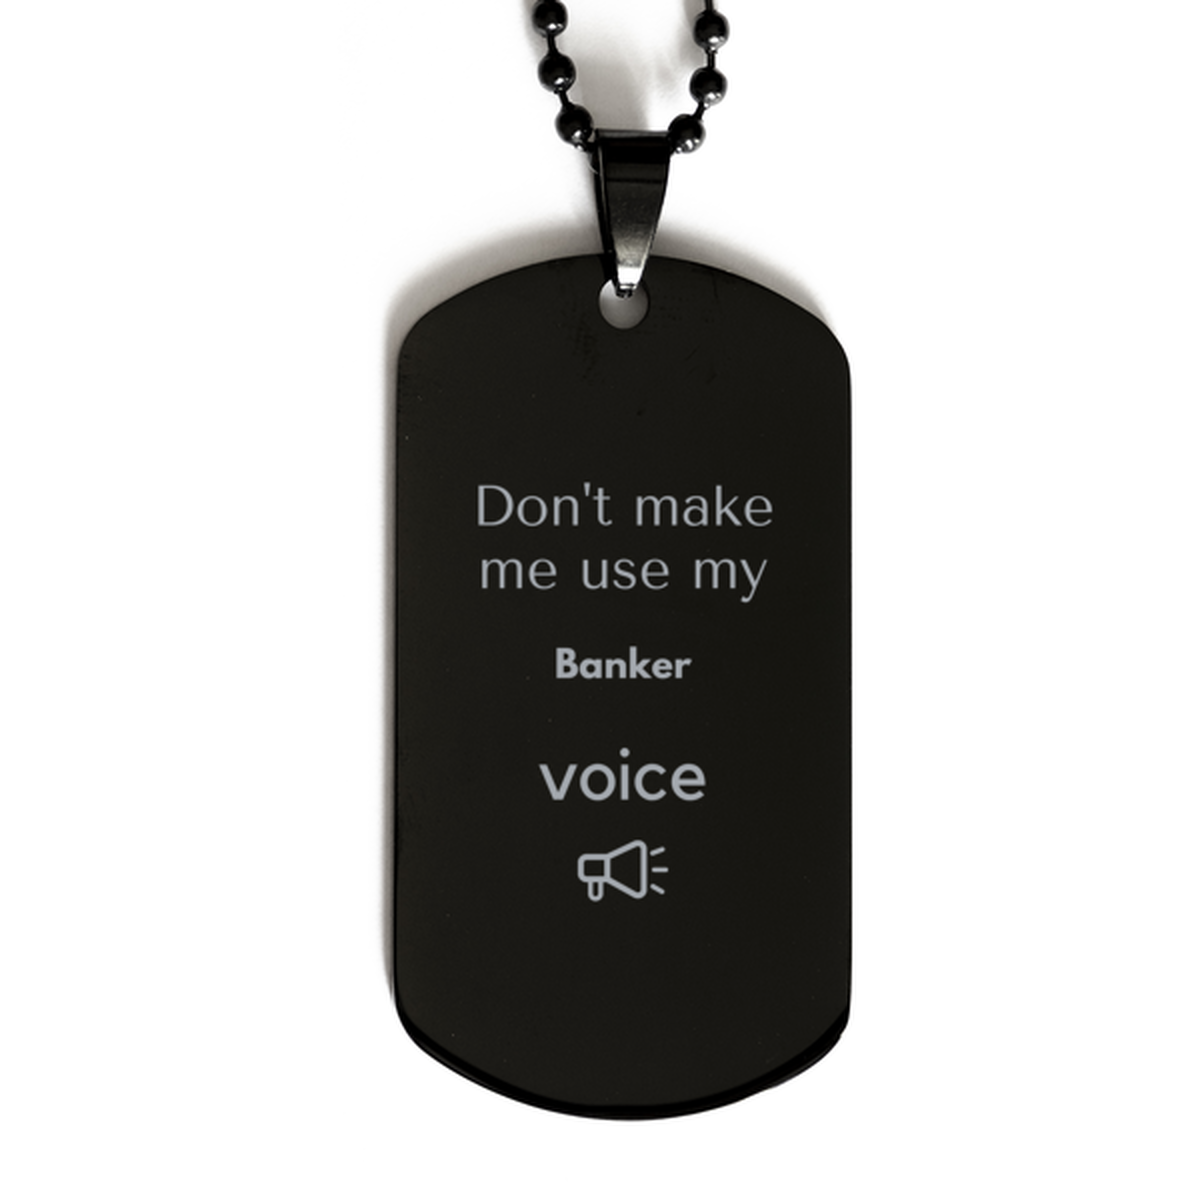 Don't make me use my Banker voice, Sarcasm Banker Gifts, Christmas Banker Black Dog Tag Birthday Unique Gifts For Banker Coworkers, Men, Women, Colleague, Friends